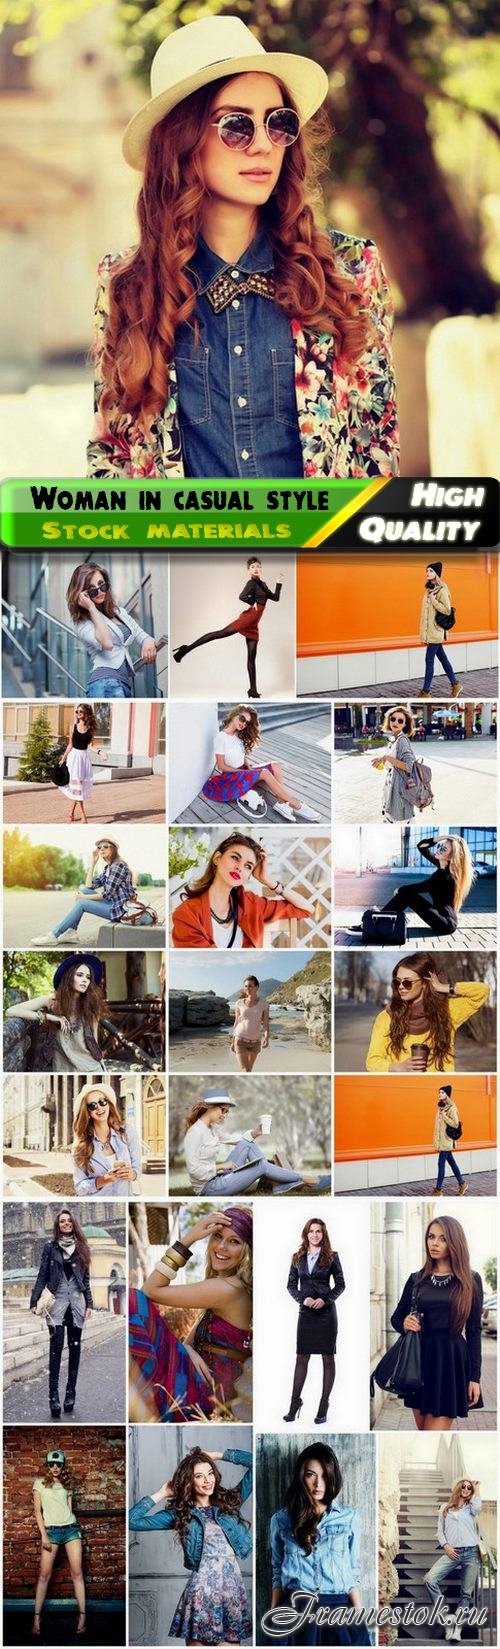 Stylish and fashionable woman in casual style - 25 HQ Jpg